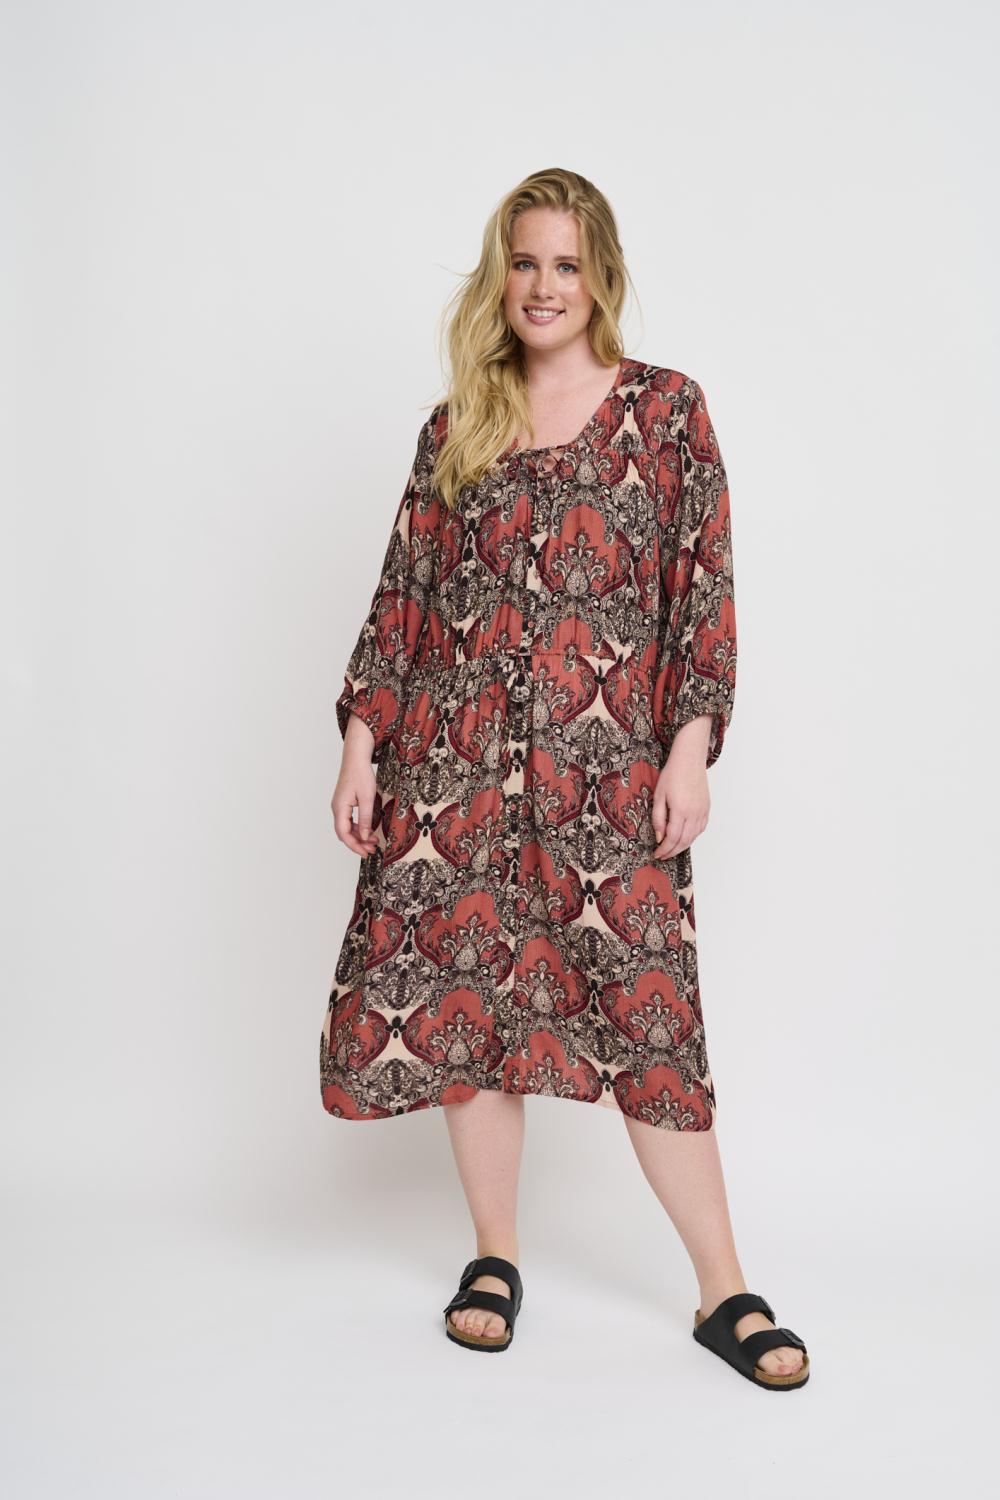 gallery-7798-for-AD5049